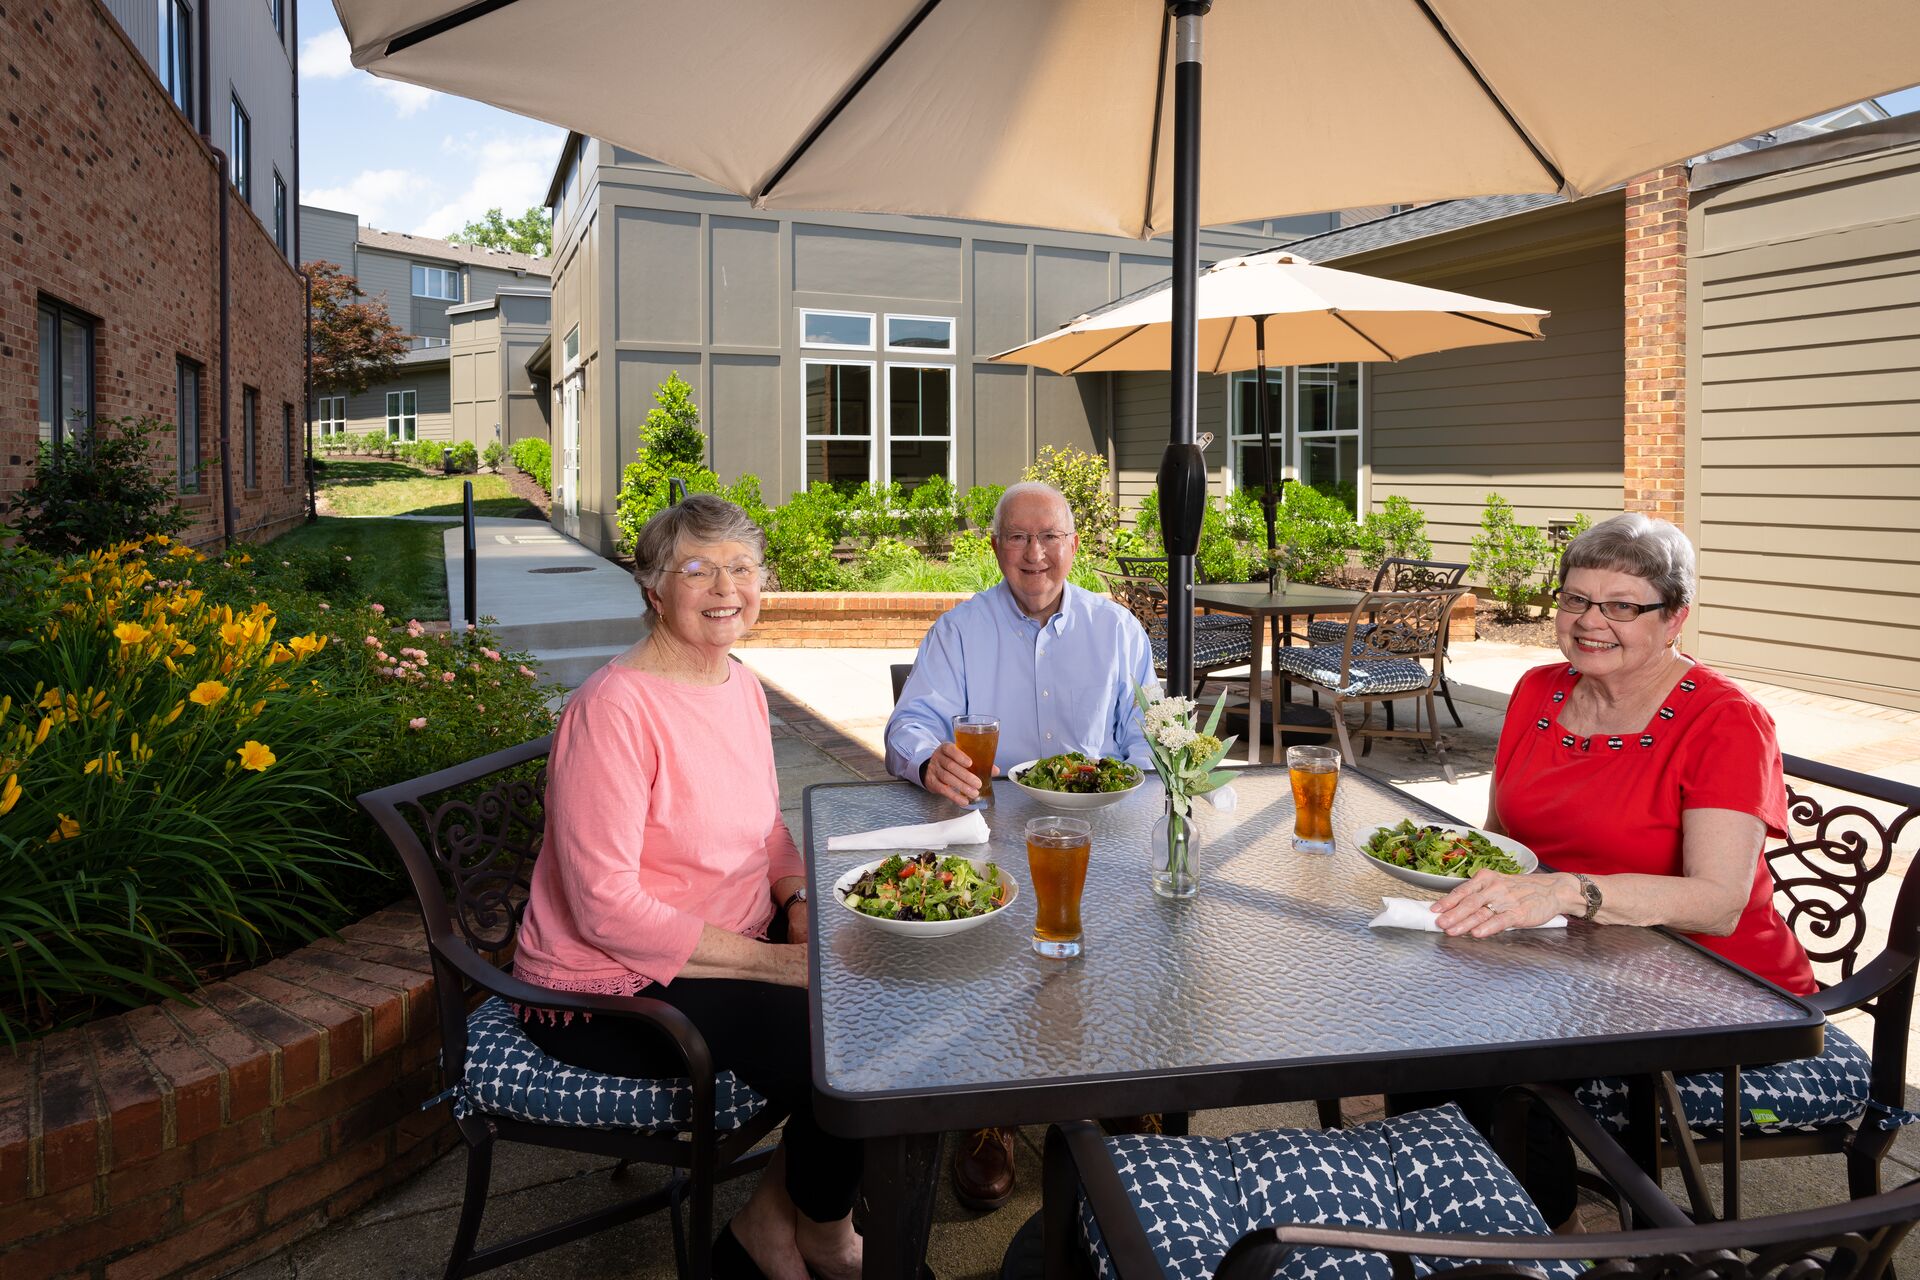 Senior residents enjoying a delicious lunch on the patio at Lakewood.